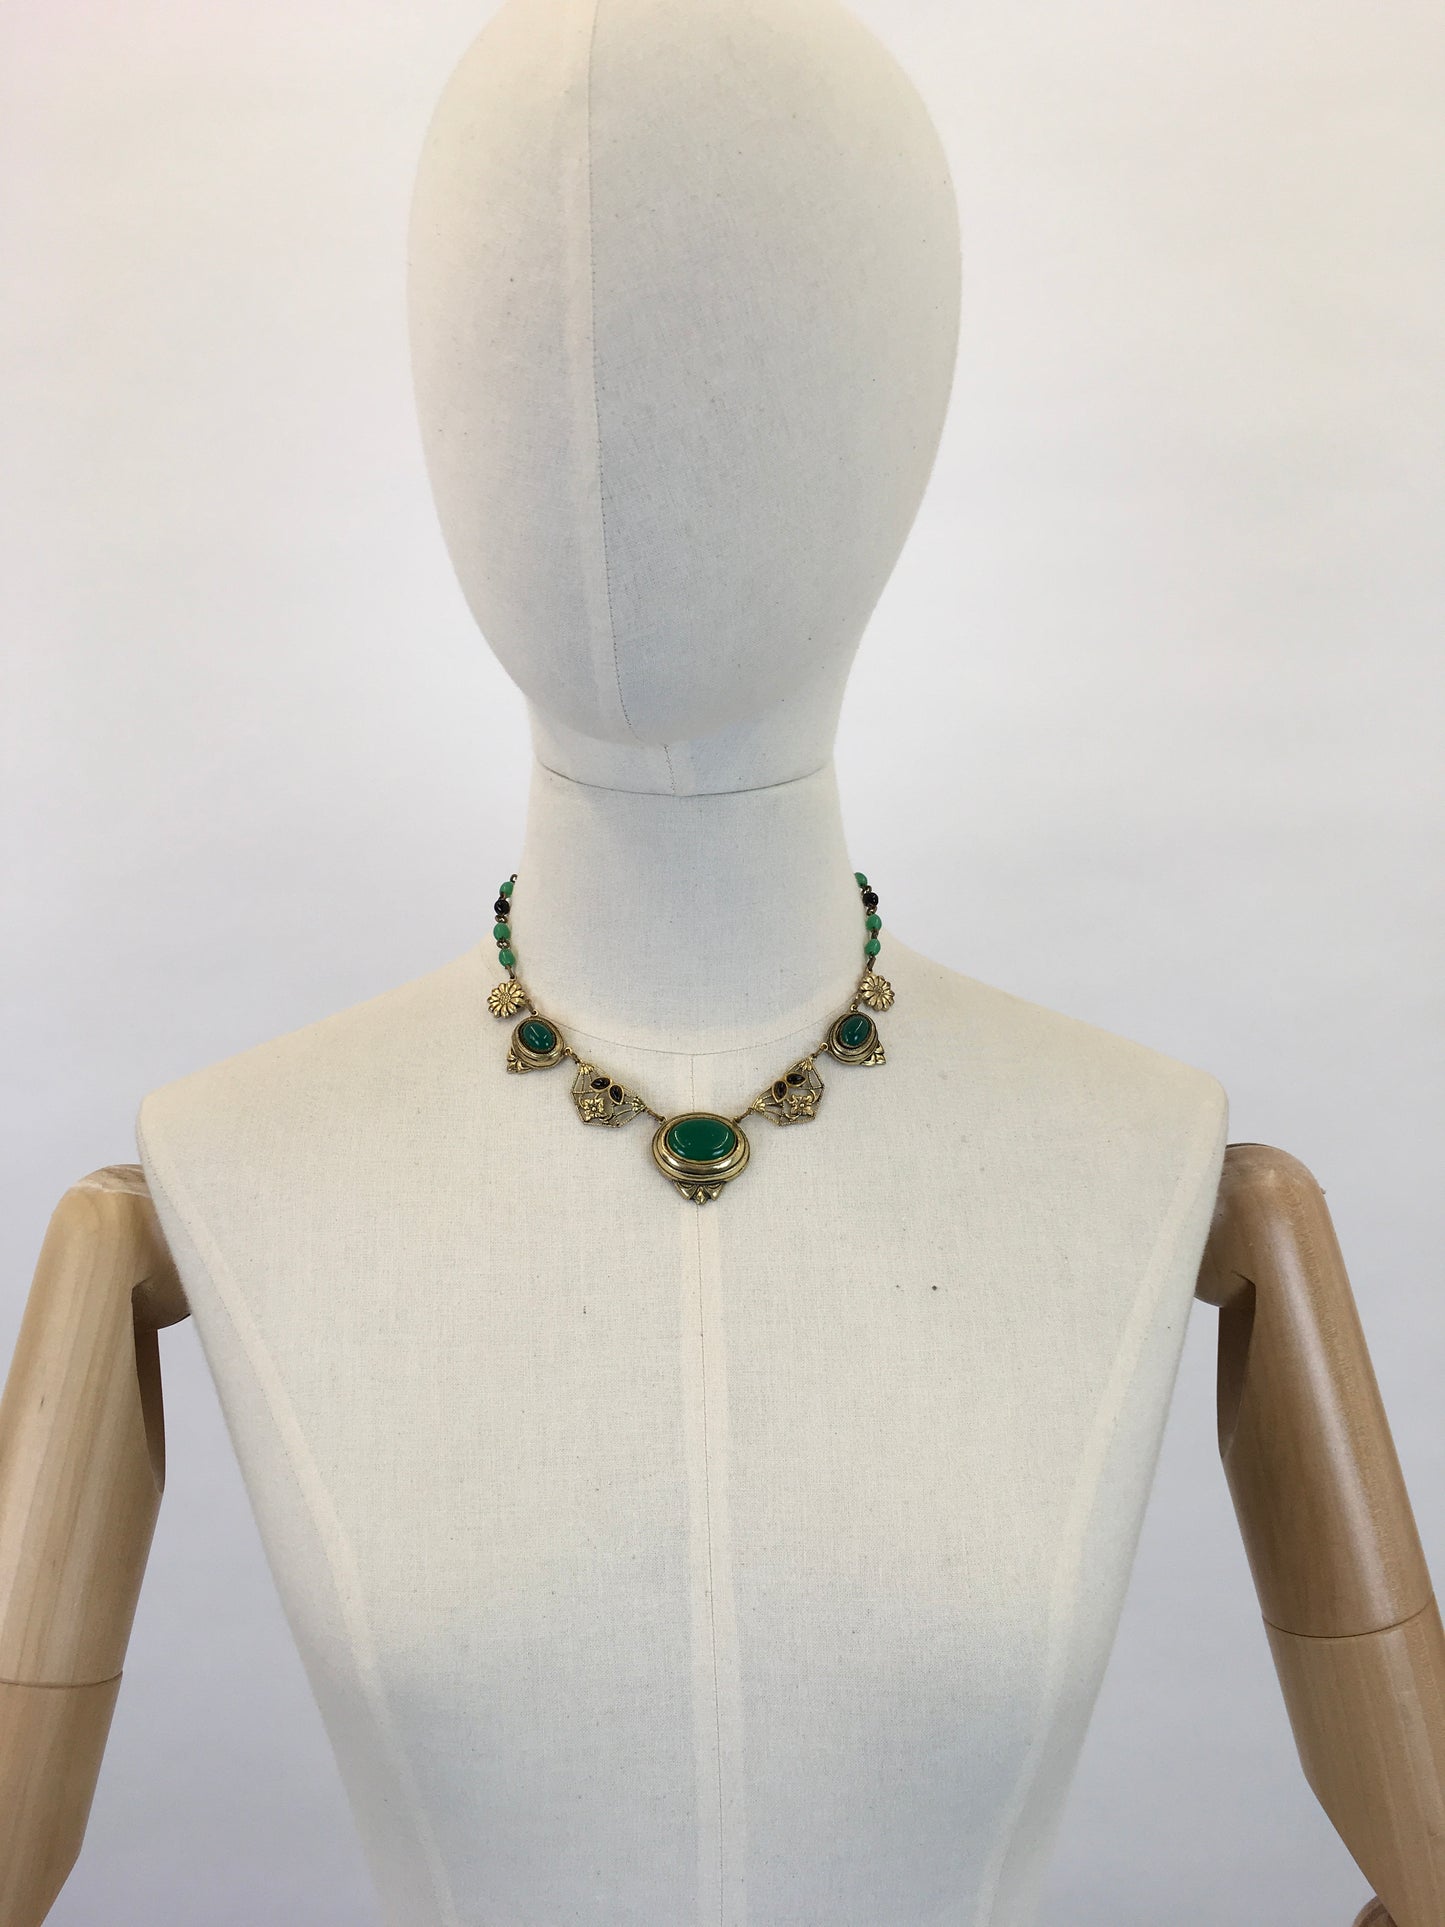 Original 1930s STUNNING Deco Necklace - Brass and Classic Deco Green Glass Beads